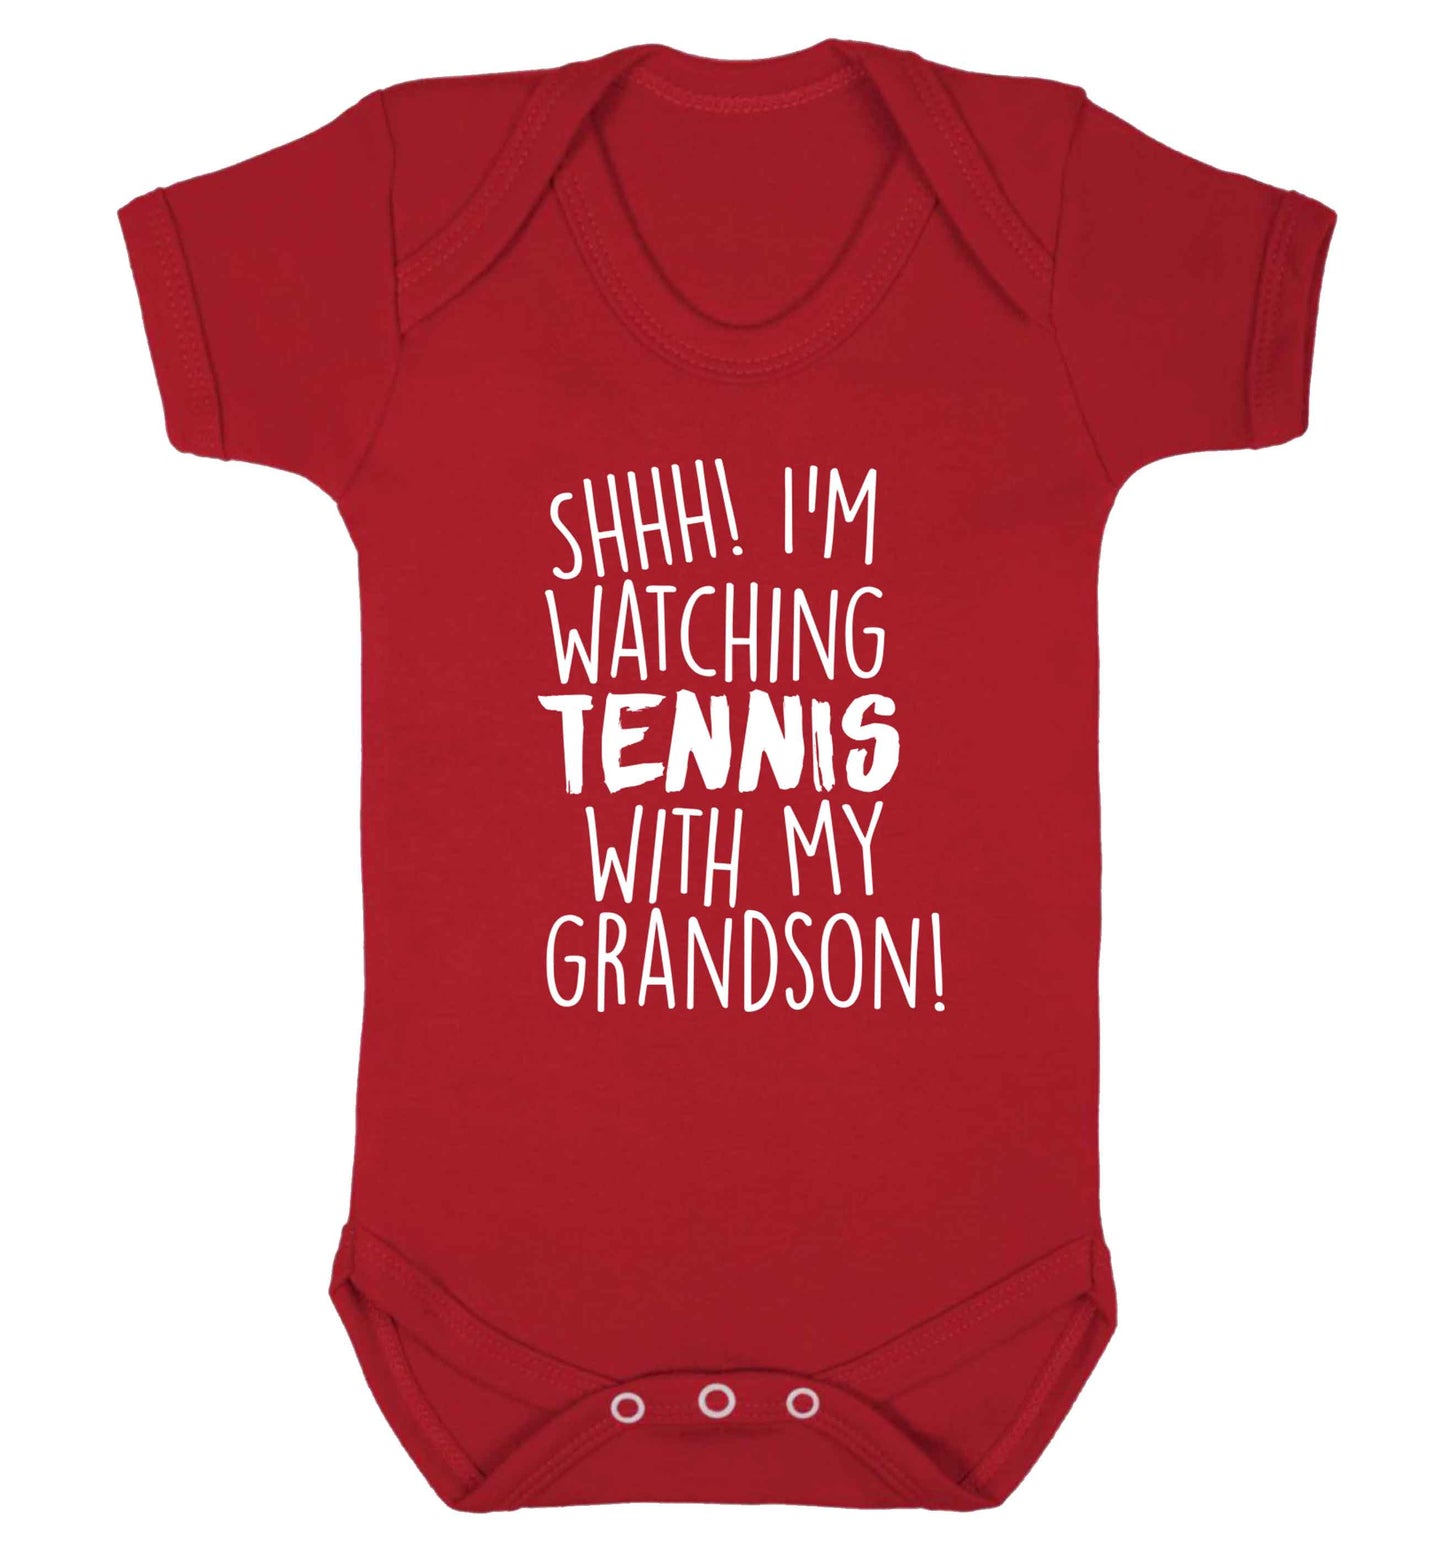 Shh! I'm watching tennis with my grandson! Baby Vest red 18-24 months